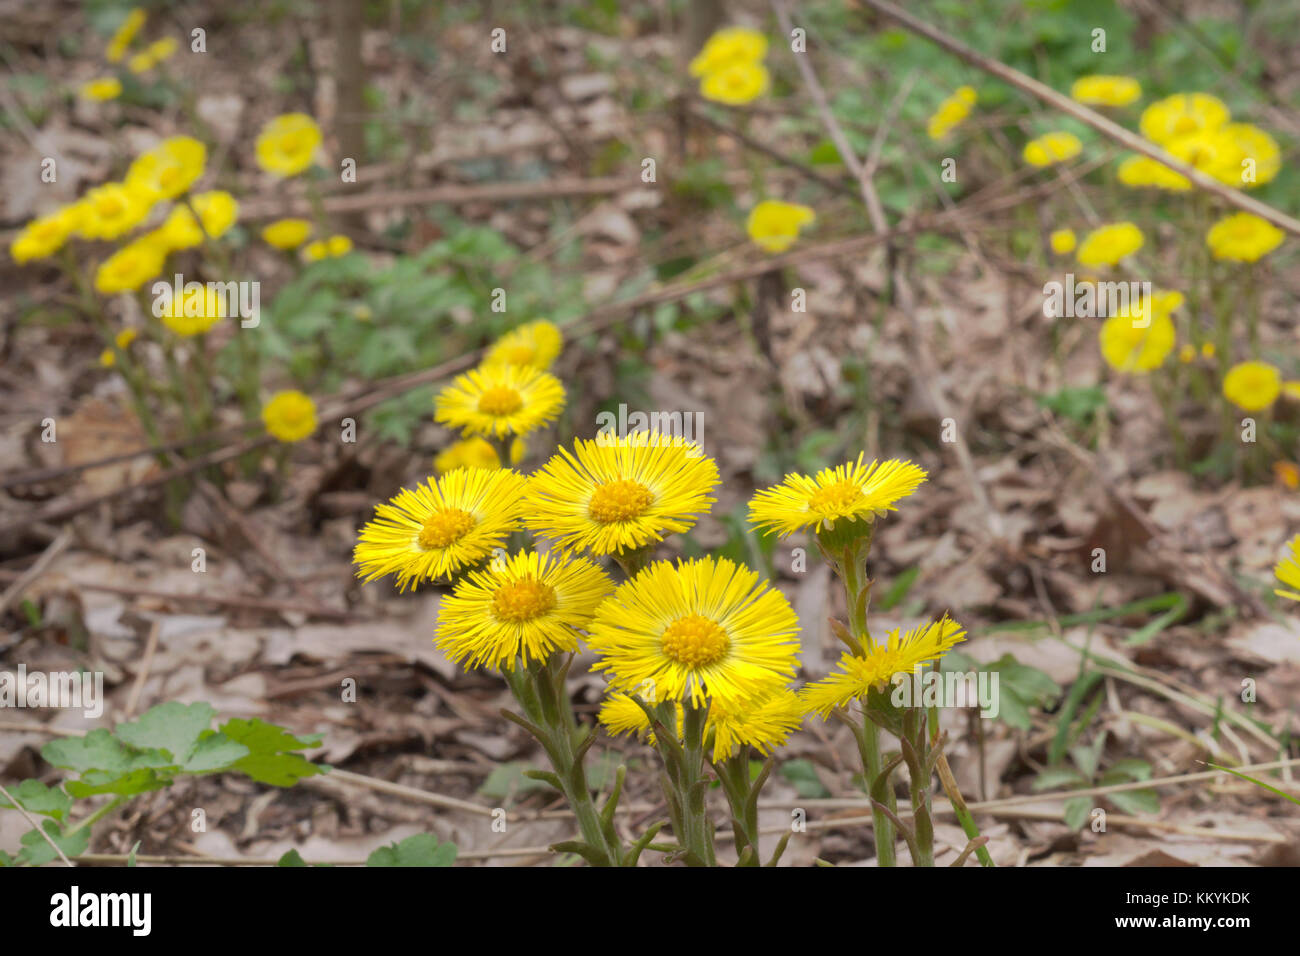 Yellow flowers of coltsfoot on still leafless stalk. Blooming Sun in spring primroses Stock Photo